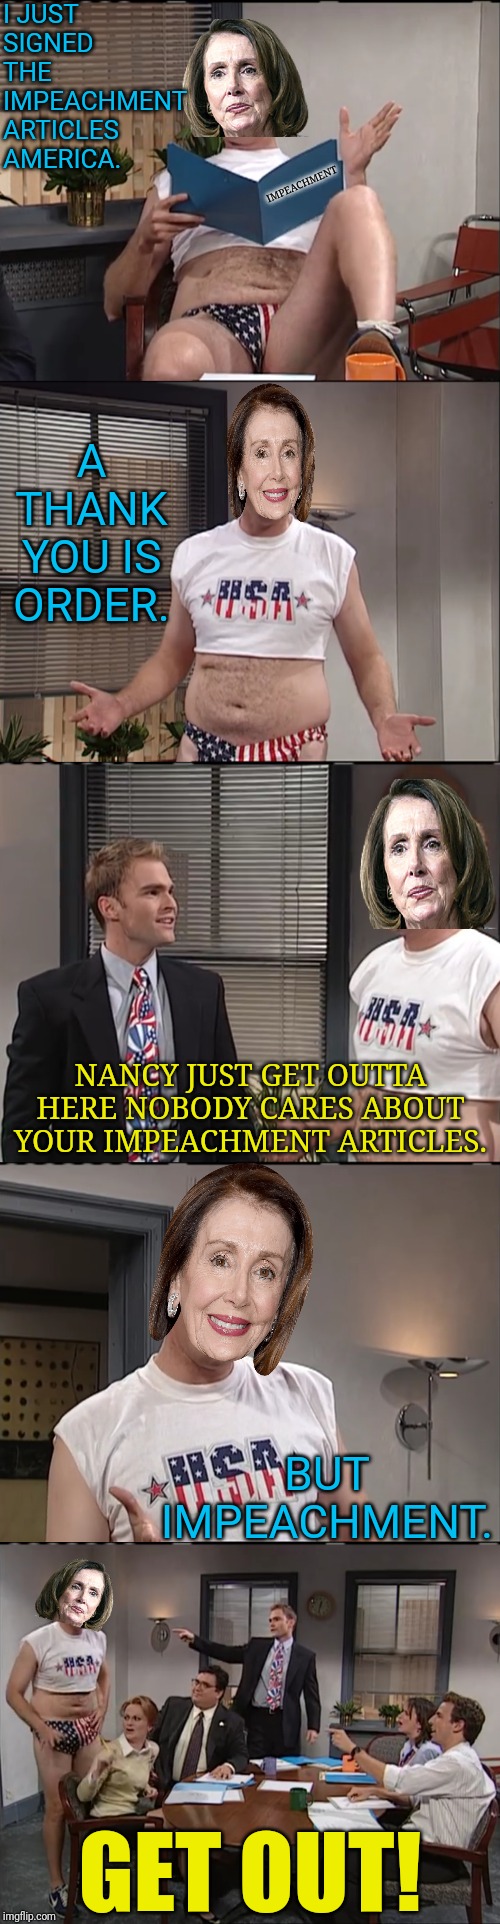 The Senate Vs Nancy Pelosi | I JUST SIGNED THE IMPEACHMENT ARTICLES AMERICA. IMPEACHMENT; A THANK YOU IS ORDER. NANCY JUST GET OUTTA HERE NOBODY CARES ABOUT YOUR IMPEACHMENT ARTICLES. BUT IMPEACHMENT. GET OUT! | image tagged in snl,trump impeachment,political meme,trump,nancy pelosi,political humor | made w/ Imgflip meme maker